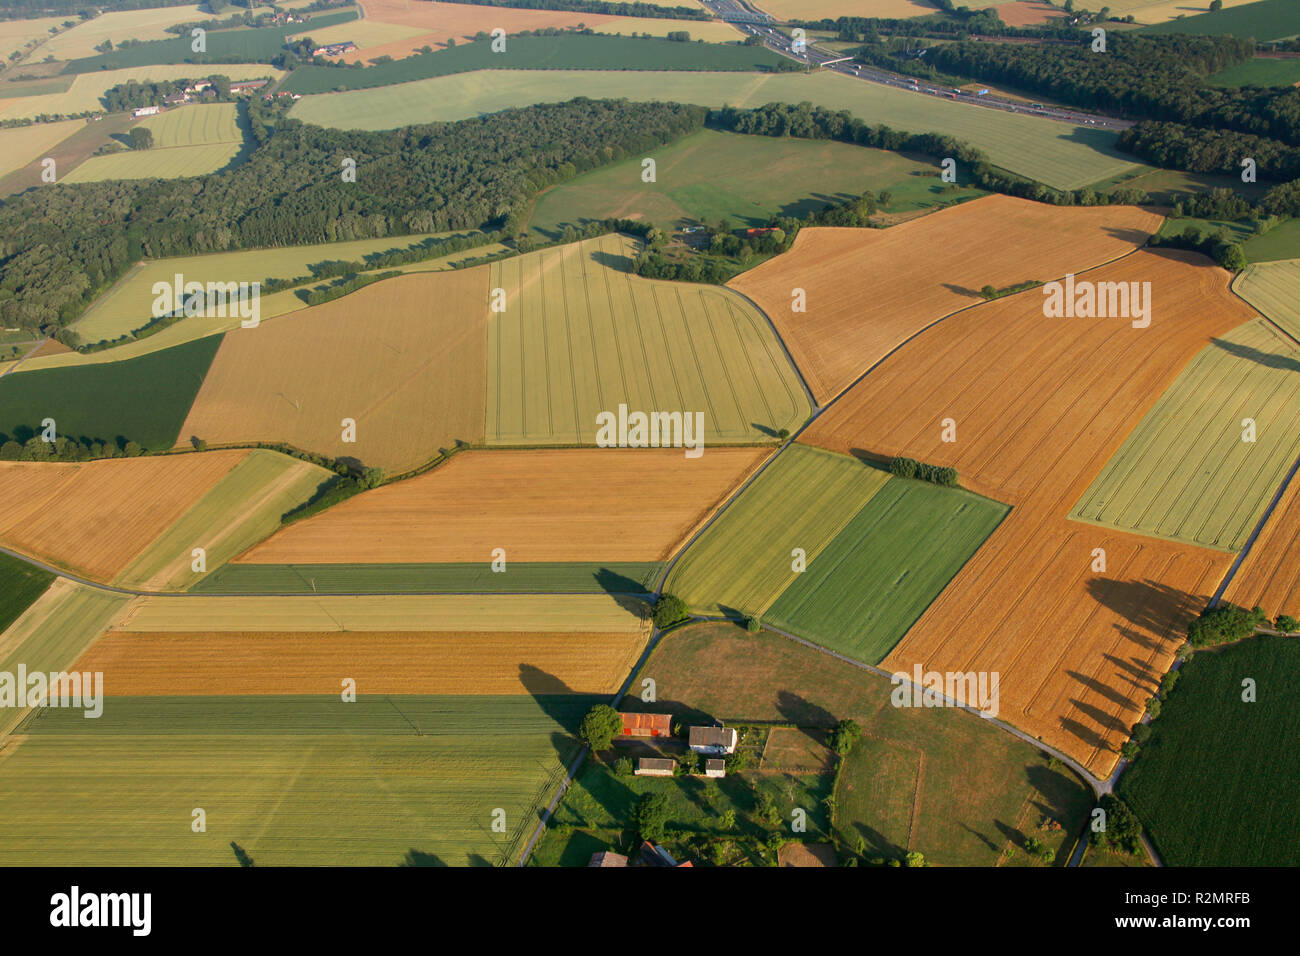 Aerial view, grain fields in the Ruhr area, agriculture, parcels, farming community Altenbögge, Bönen, Ruhr area, North Rhine-Westphalia, Germany, Europe, Stock Photo